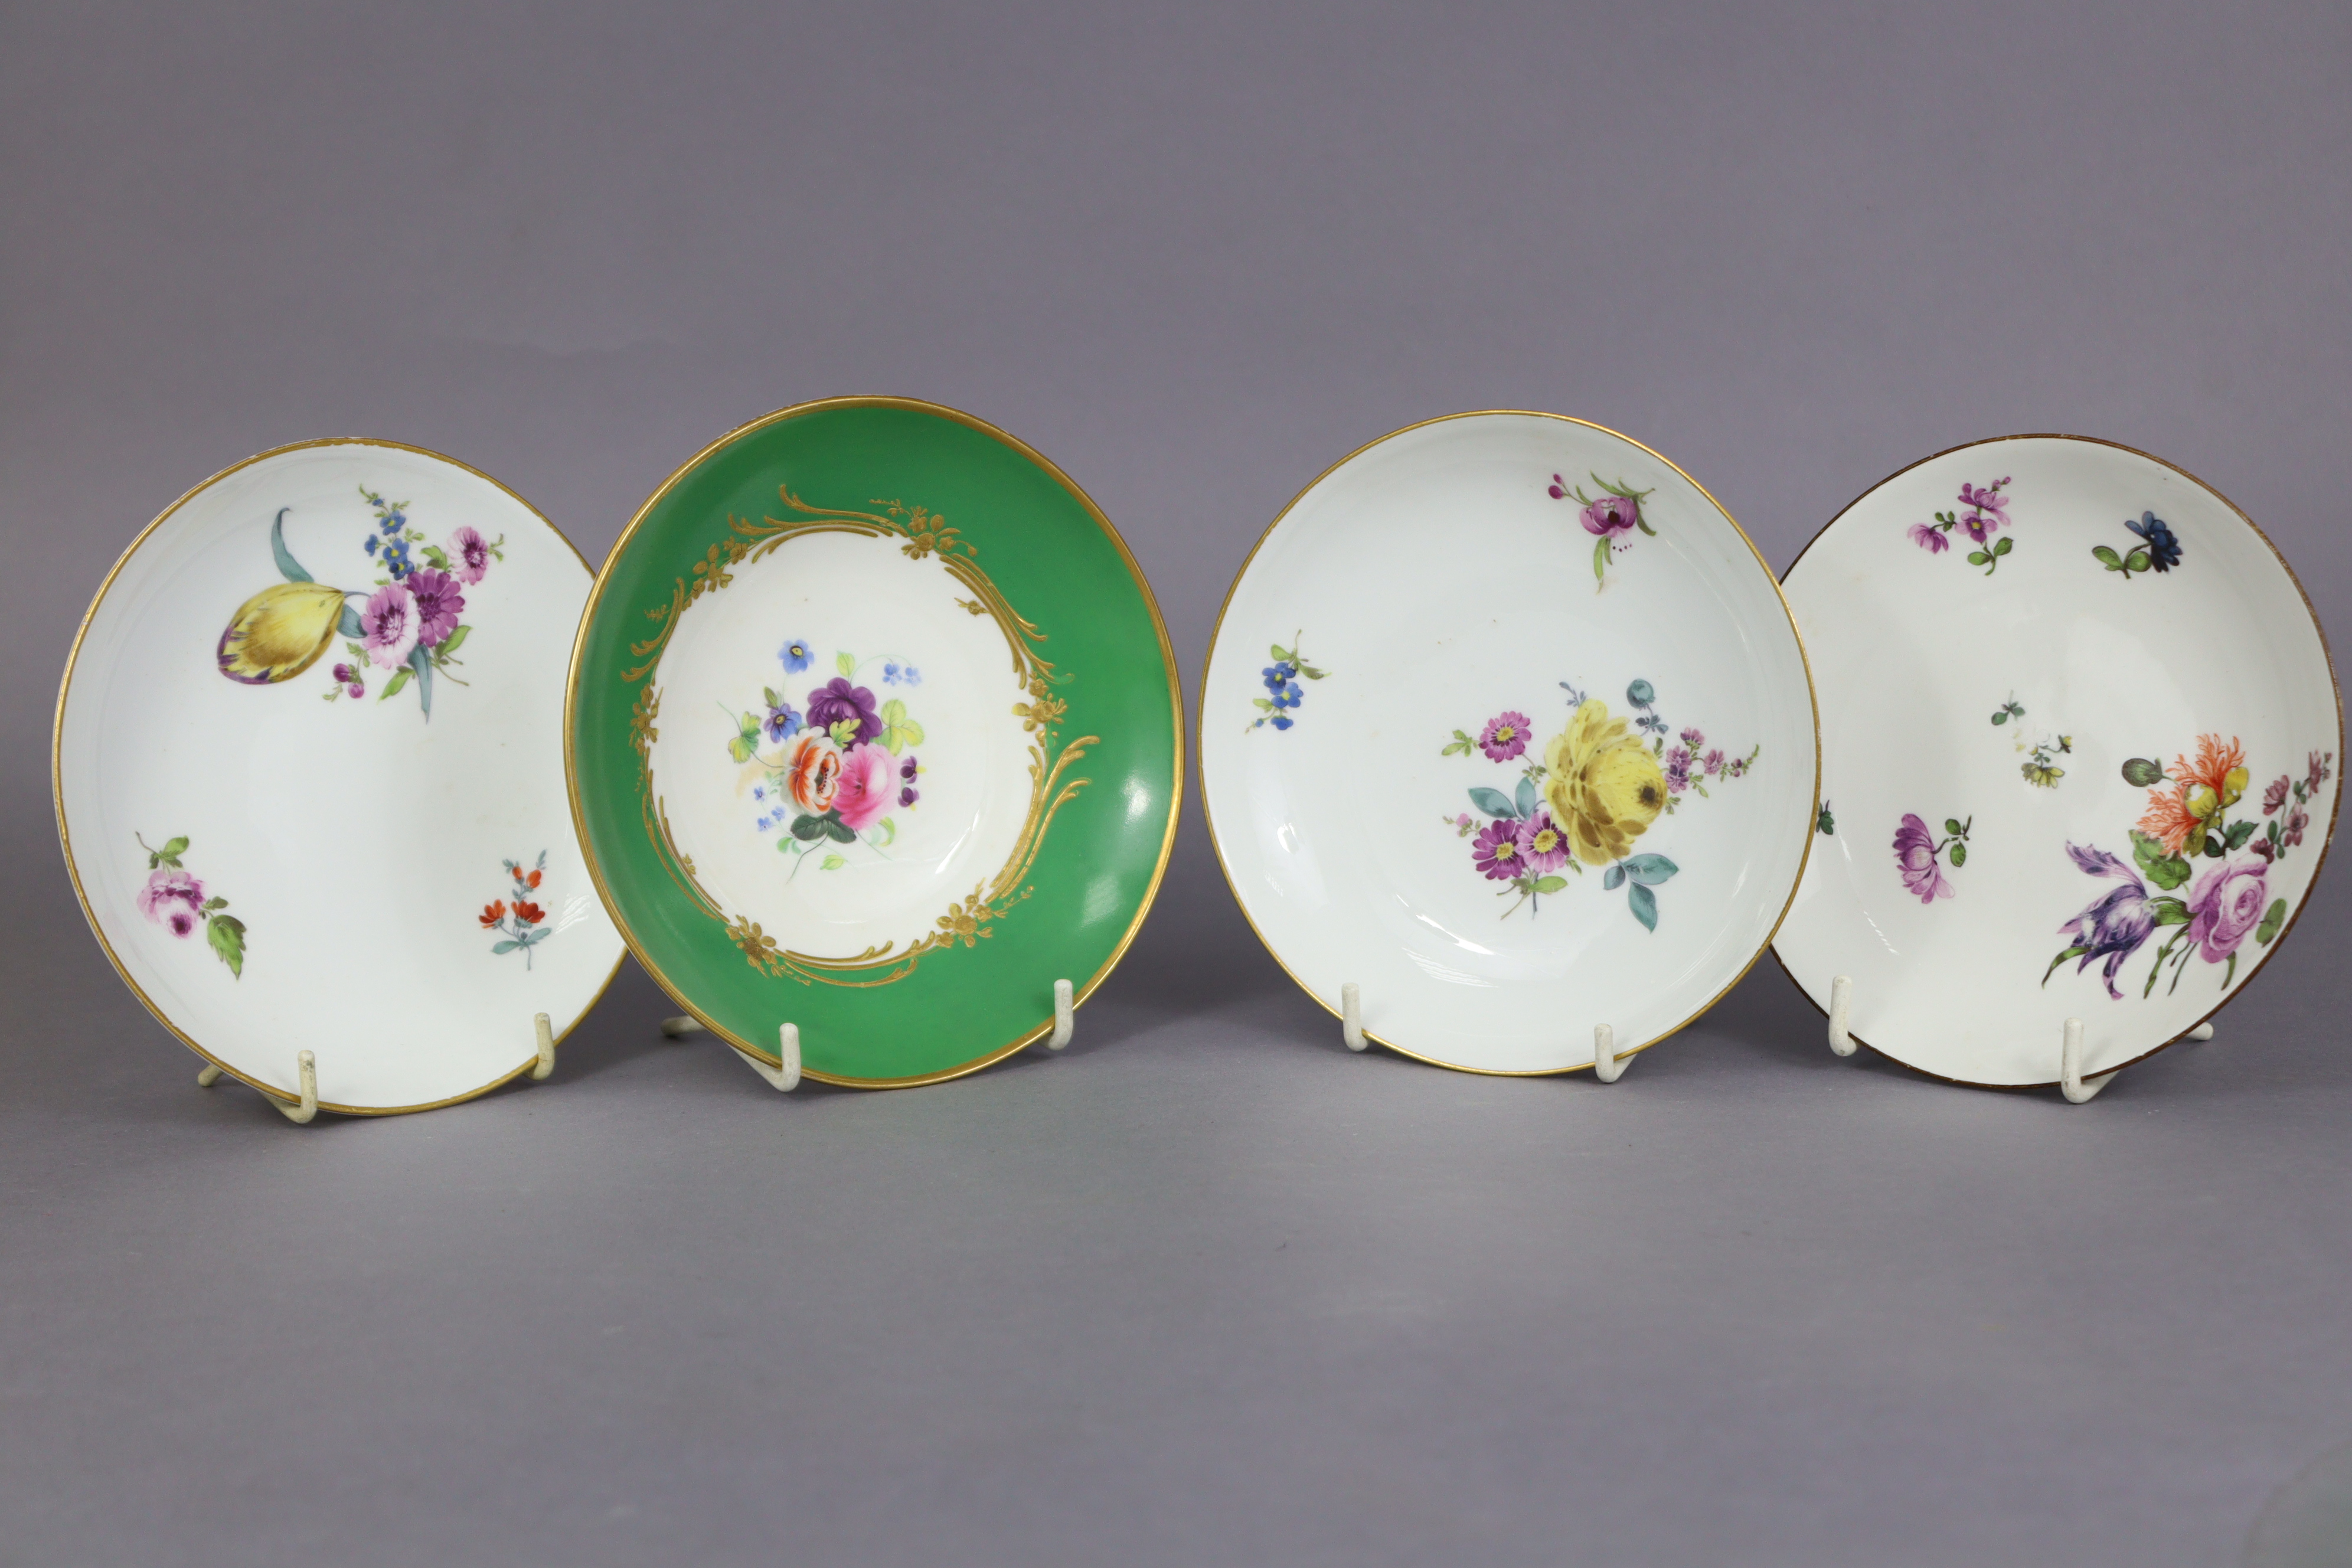 An 18th century Meissen porcelain saucer painted with flower-sprays & with brown rim, 5¼” diam.; a